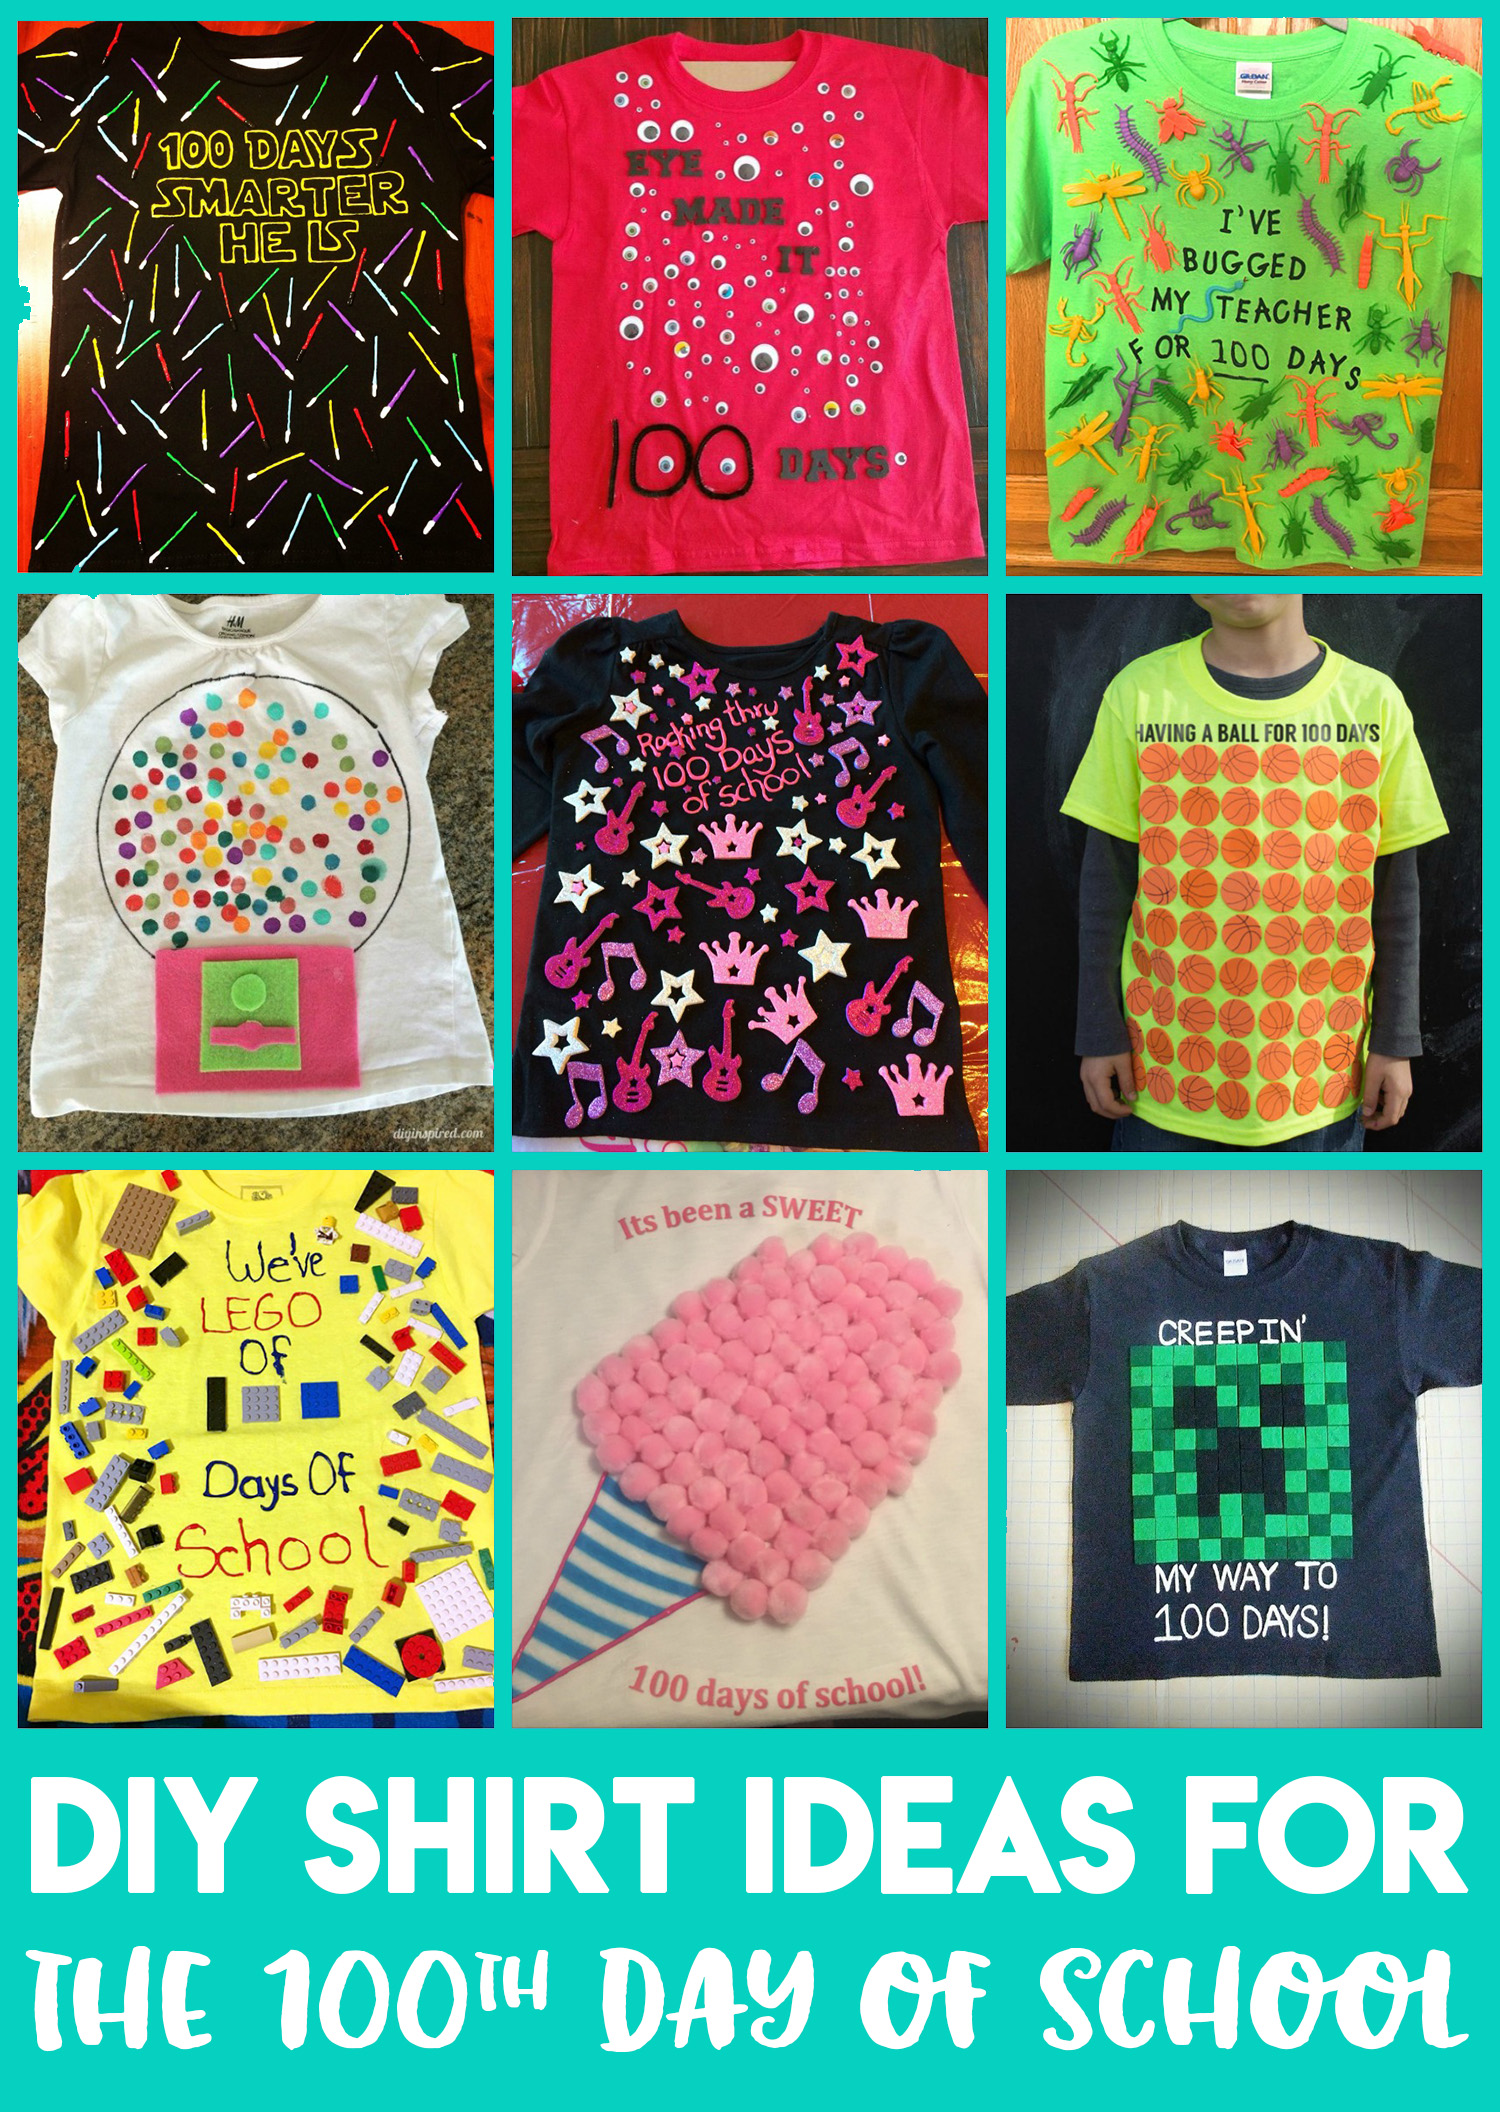 30-easy-100-days-of-school-shirt-ideas-happiness-is-homemade